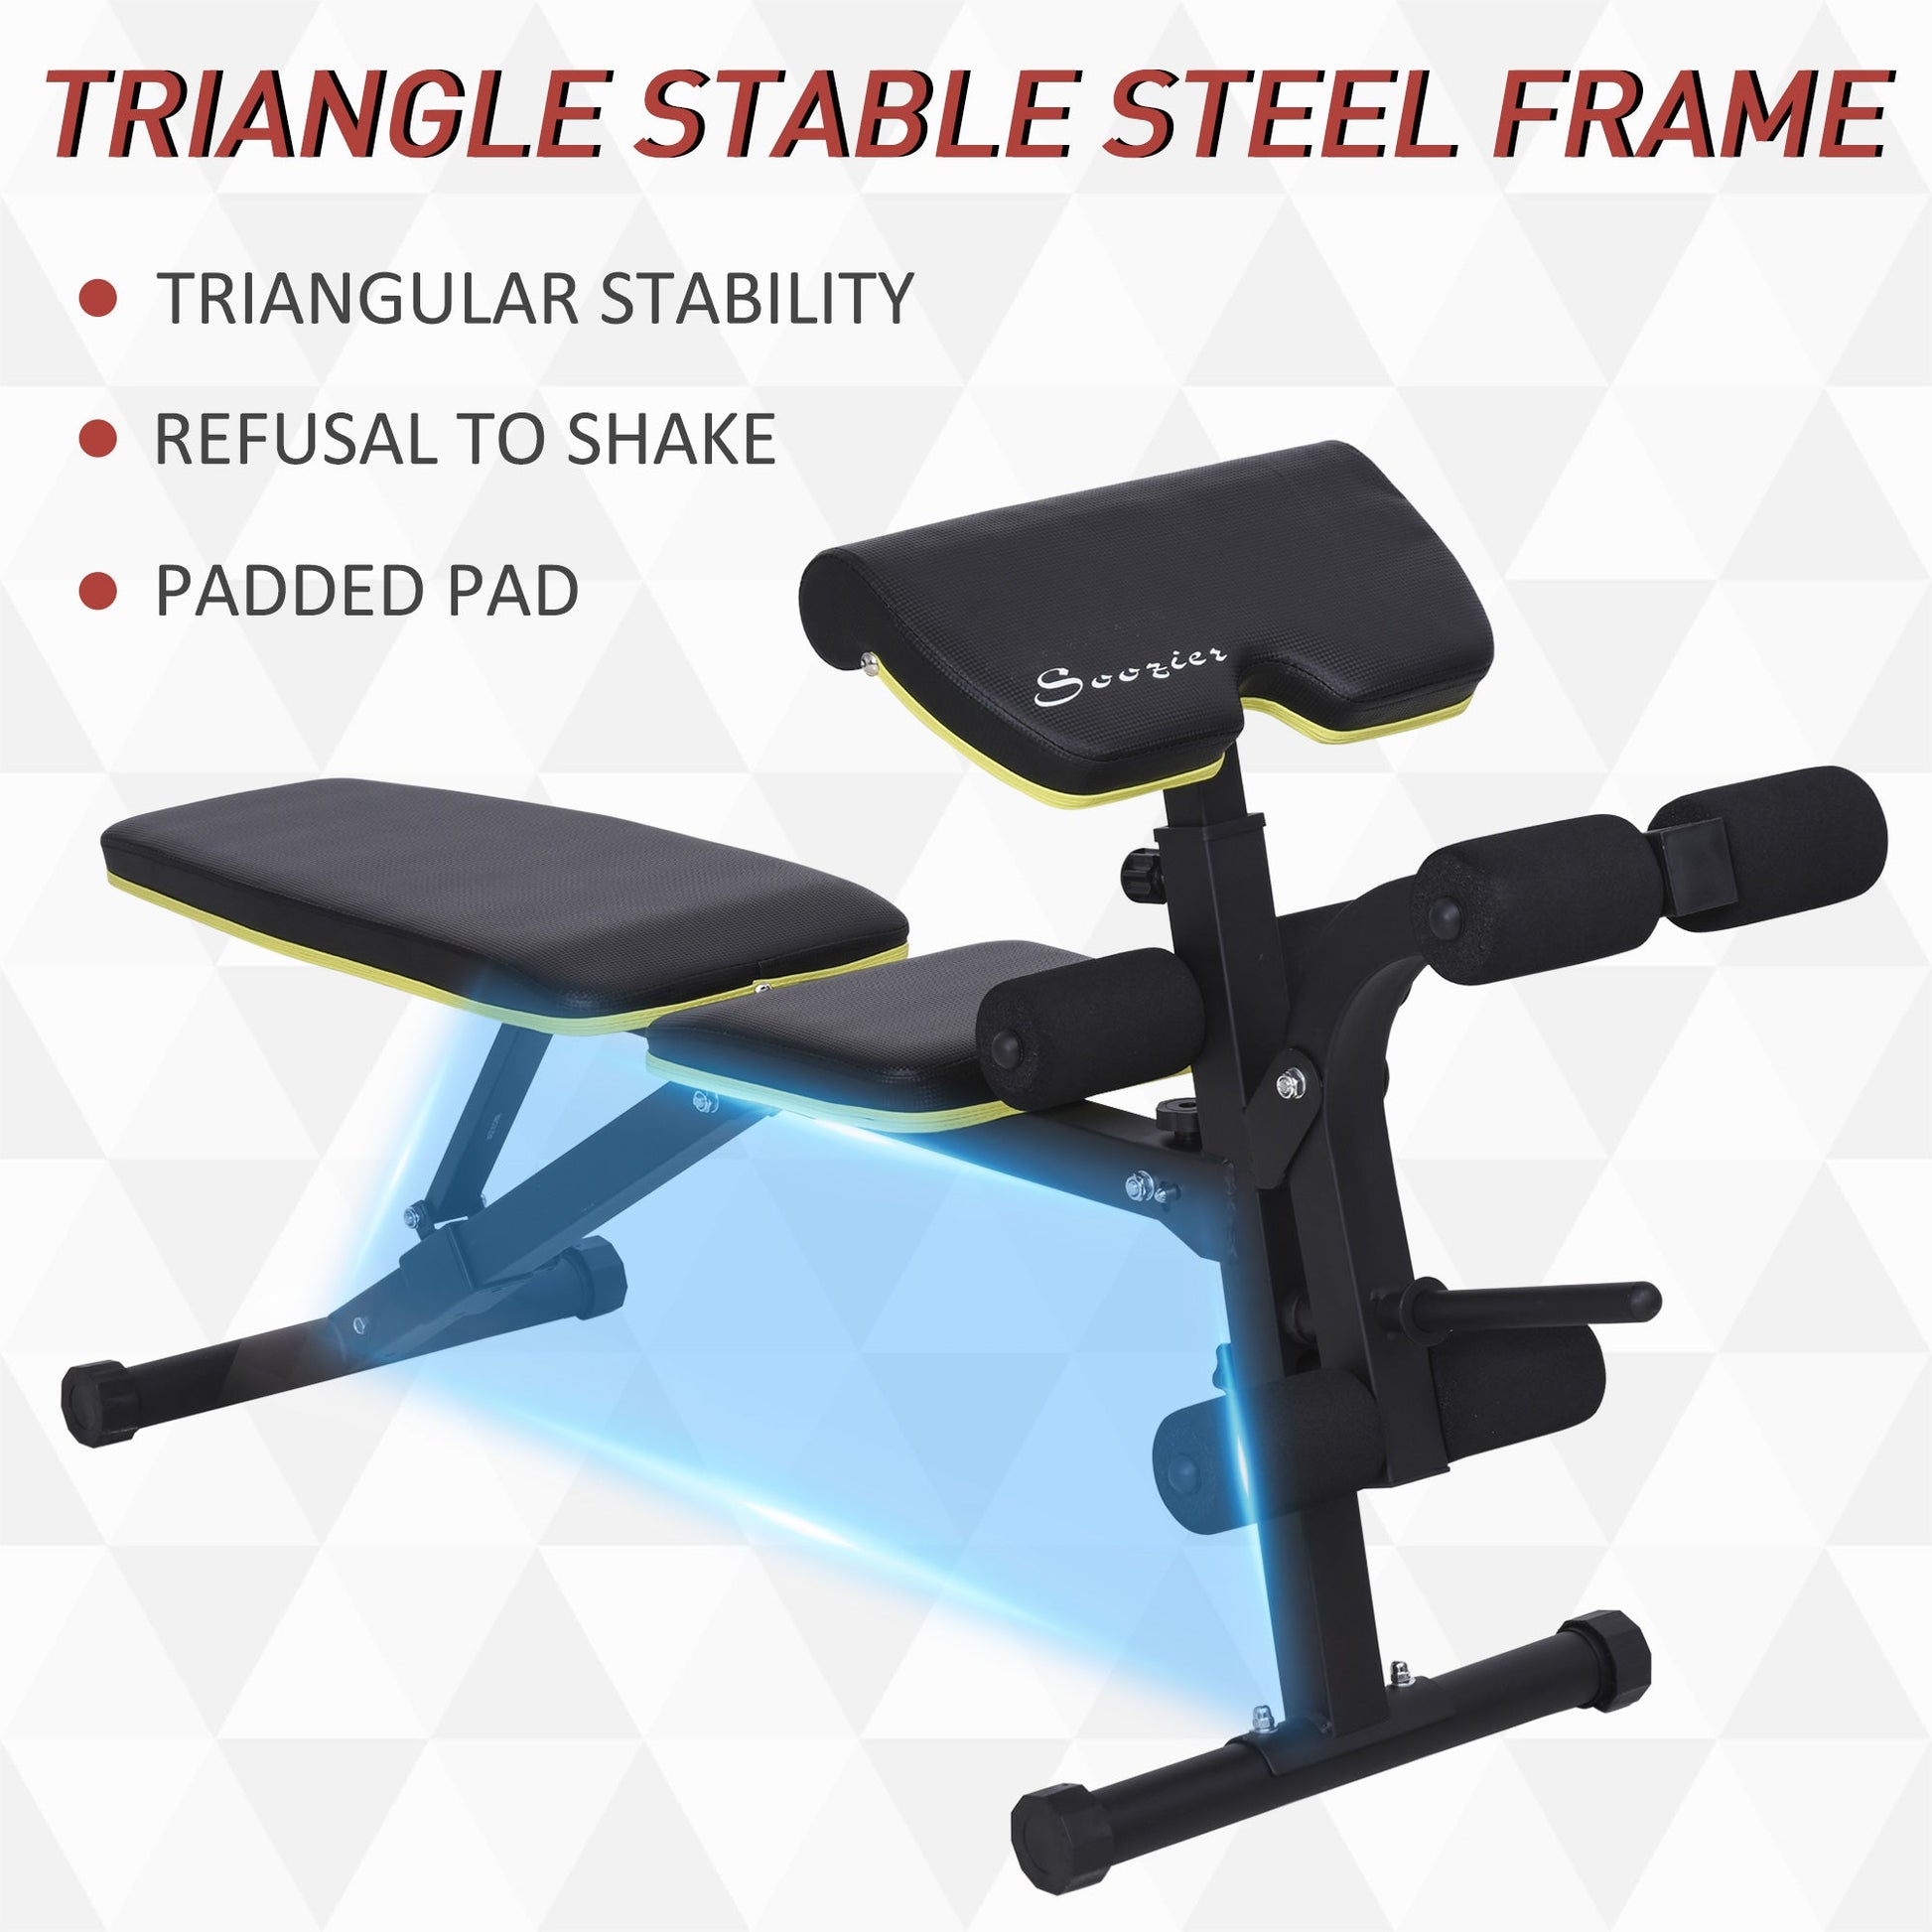 Adjustable Weight Bench, Sit Up Dumbbell Bench, Multi-Functional Purpose Hyper Extension Workout Bench with Adjustable Seat and Back Angle at Gallery Canada